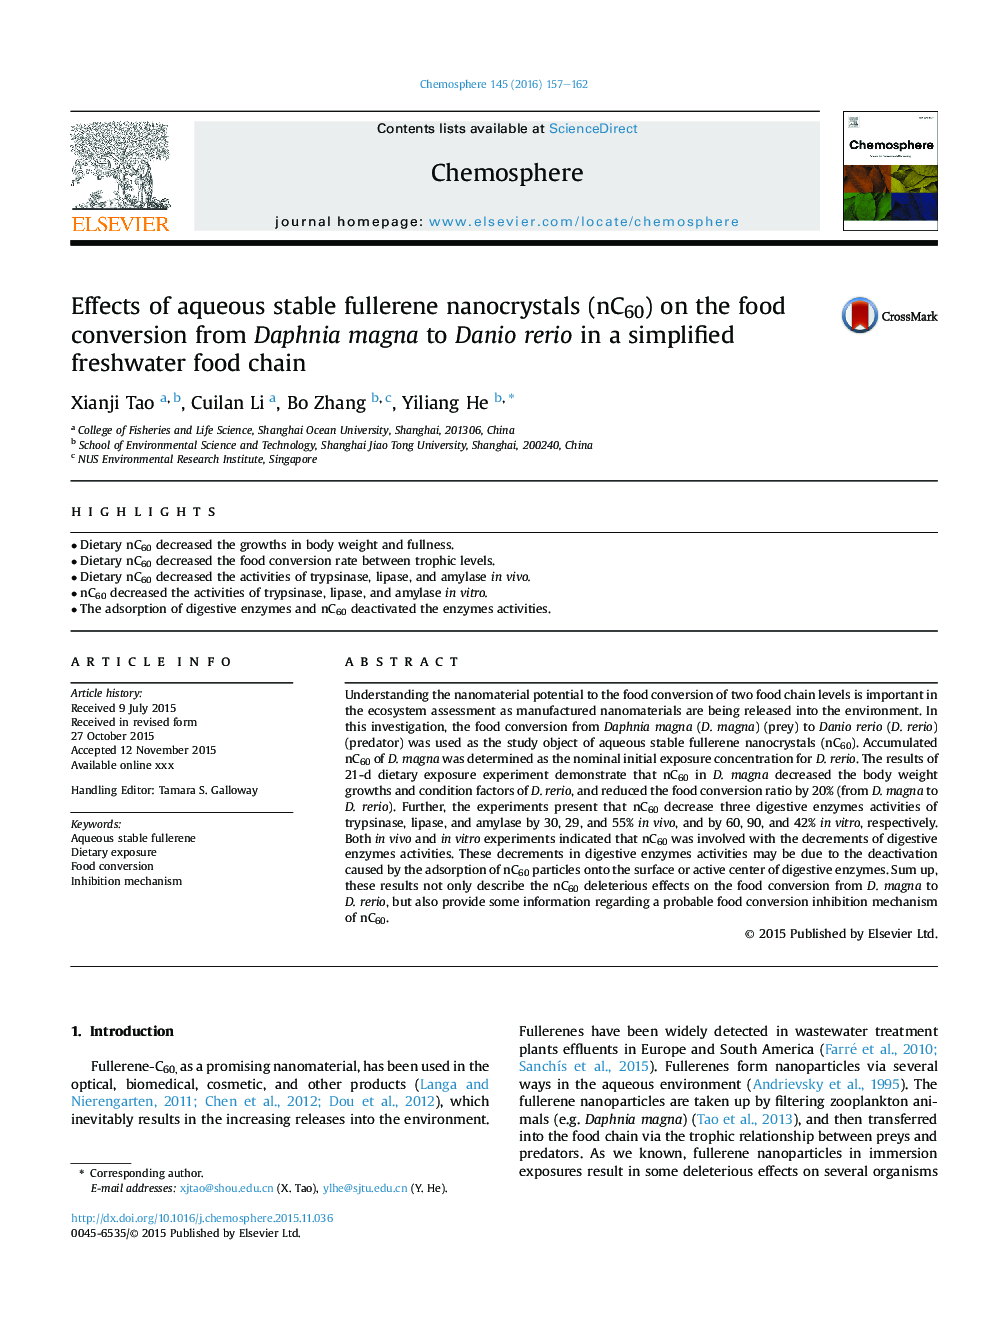 Effects of aqueous stable fullerene nanocrystals (nC60) on the food conversion from Daphnia magna to Danio rerio in a simplified freshwater food chain